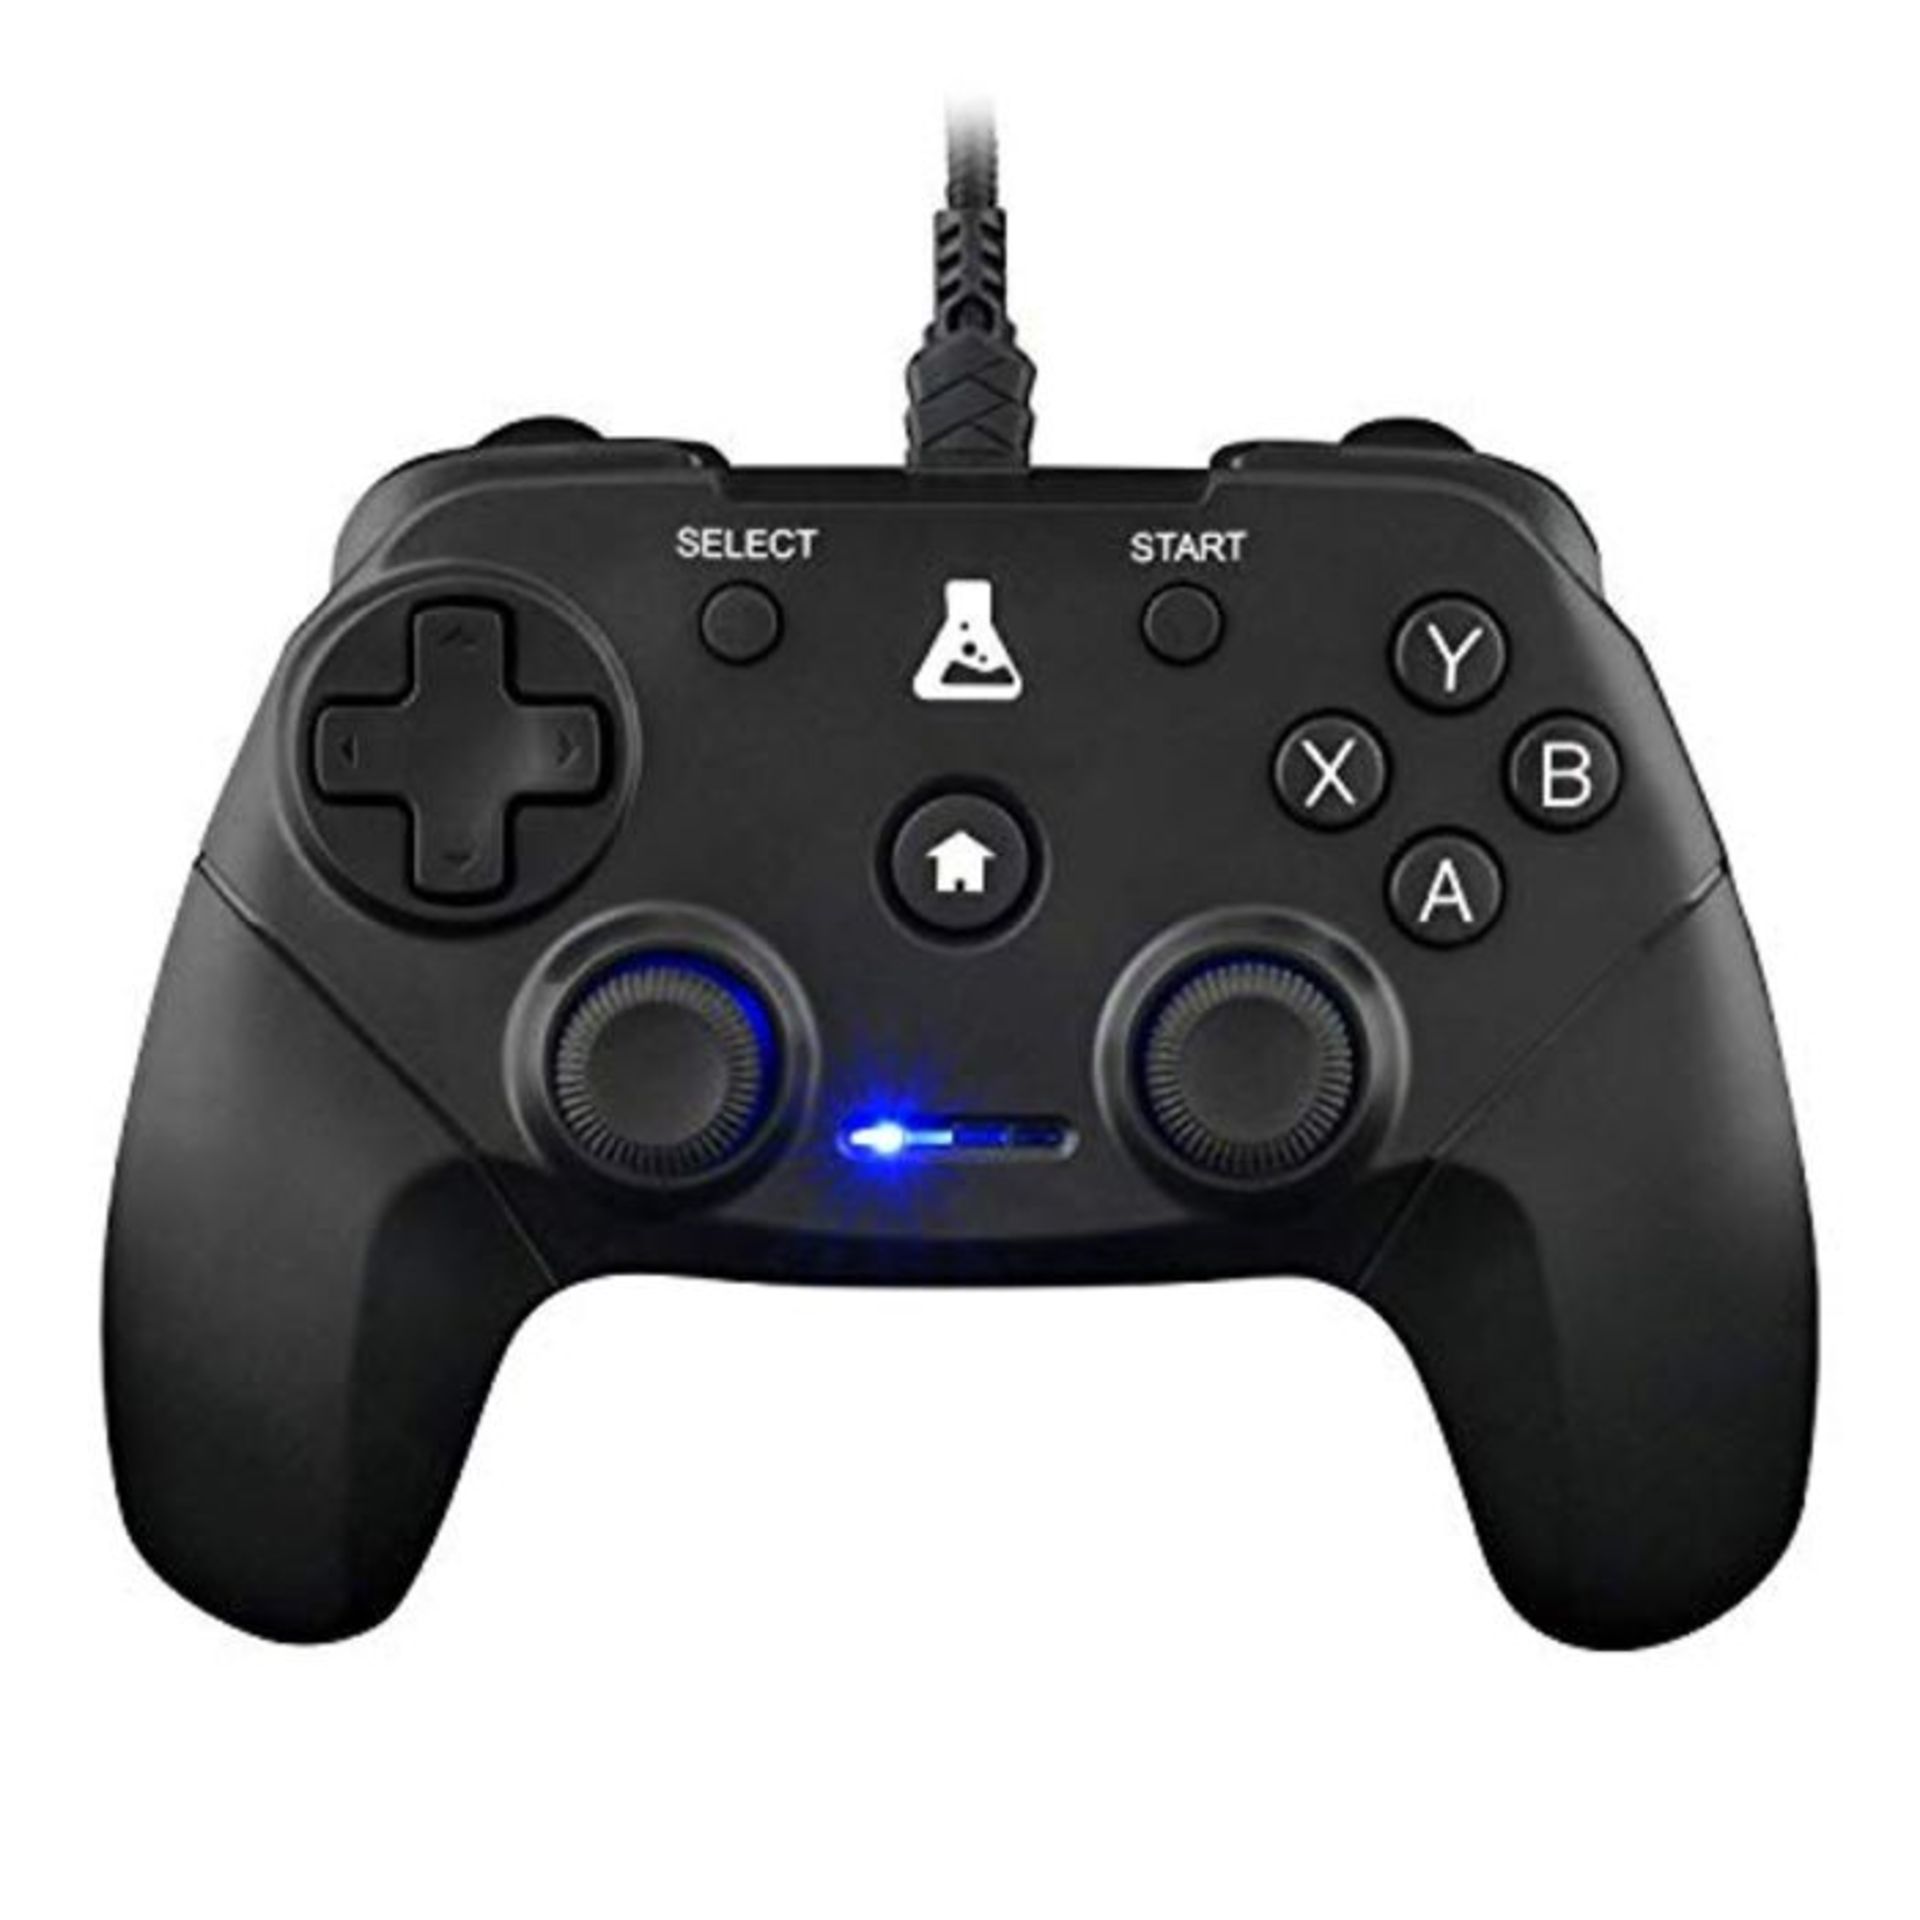 G-LAB K-Pad Thorium USB Wired PC & PS3 Gaming Controller with Built-In Vibrations, Gam